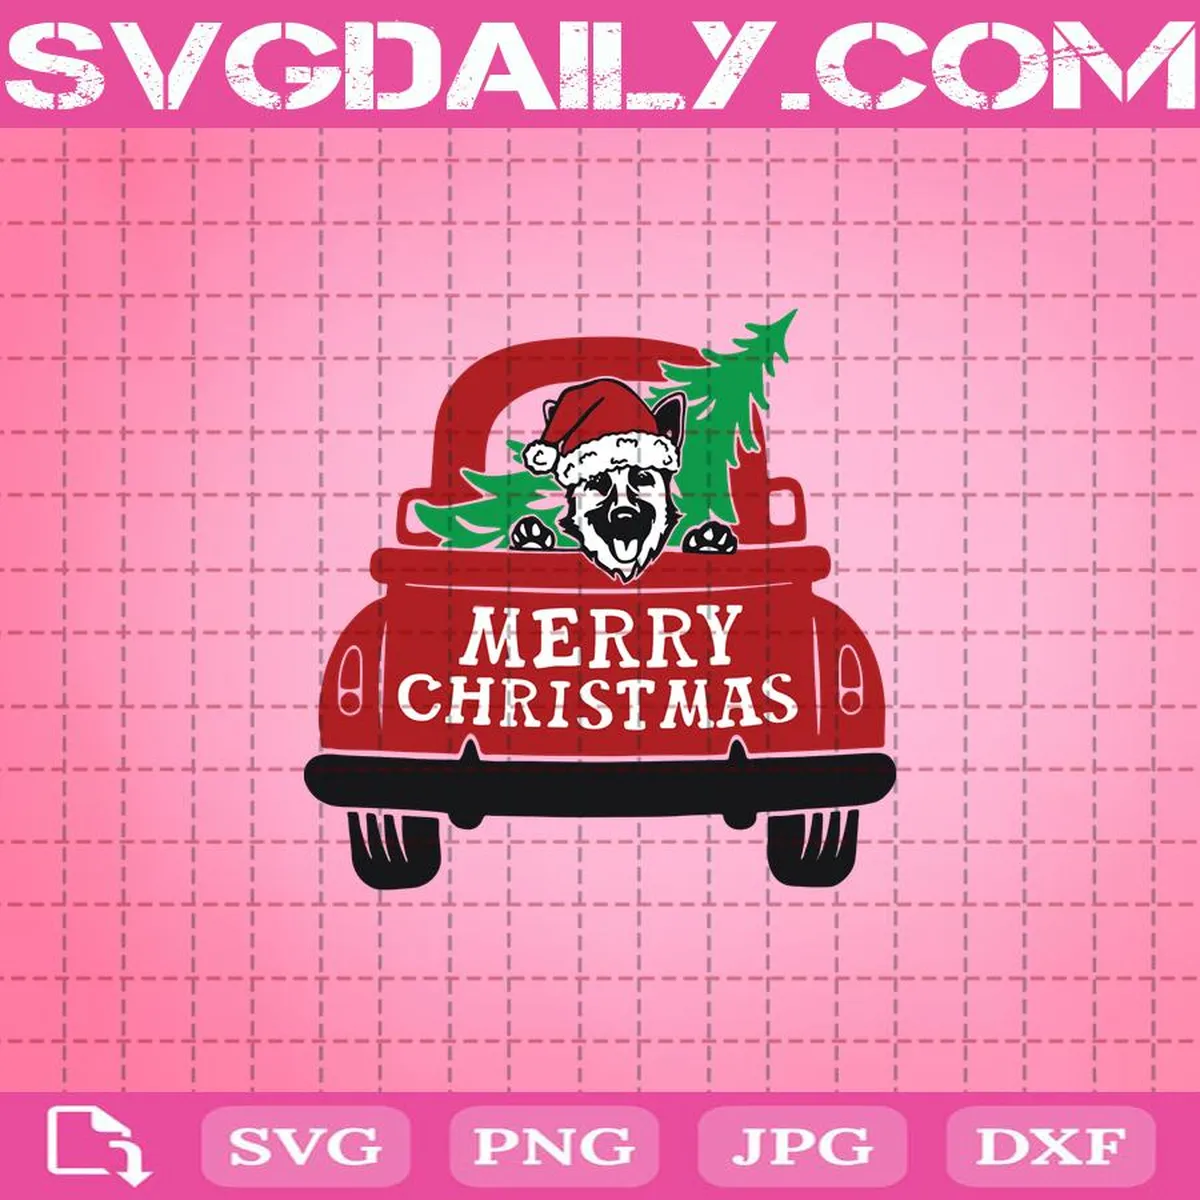 Truck With Dog And Christmas Tree Svg, Christmas Dog Truck Svg, Merry Christmas Svg, Christmas Svg, Svg Png Dxf Eps Download Files